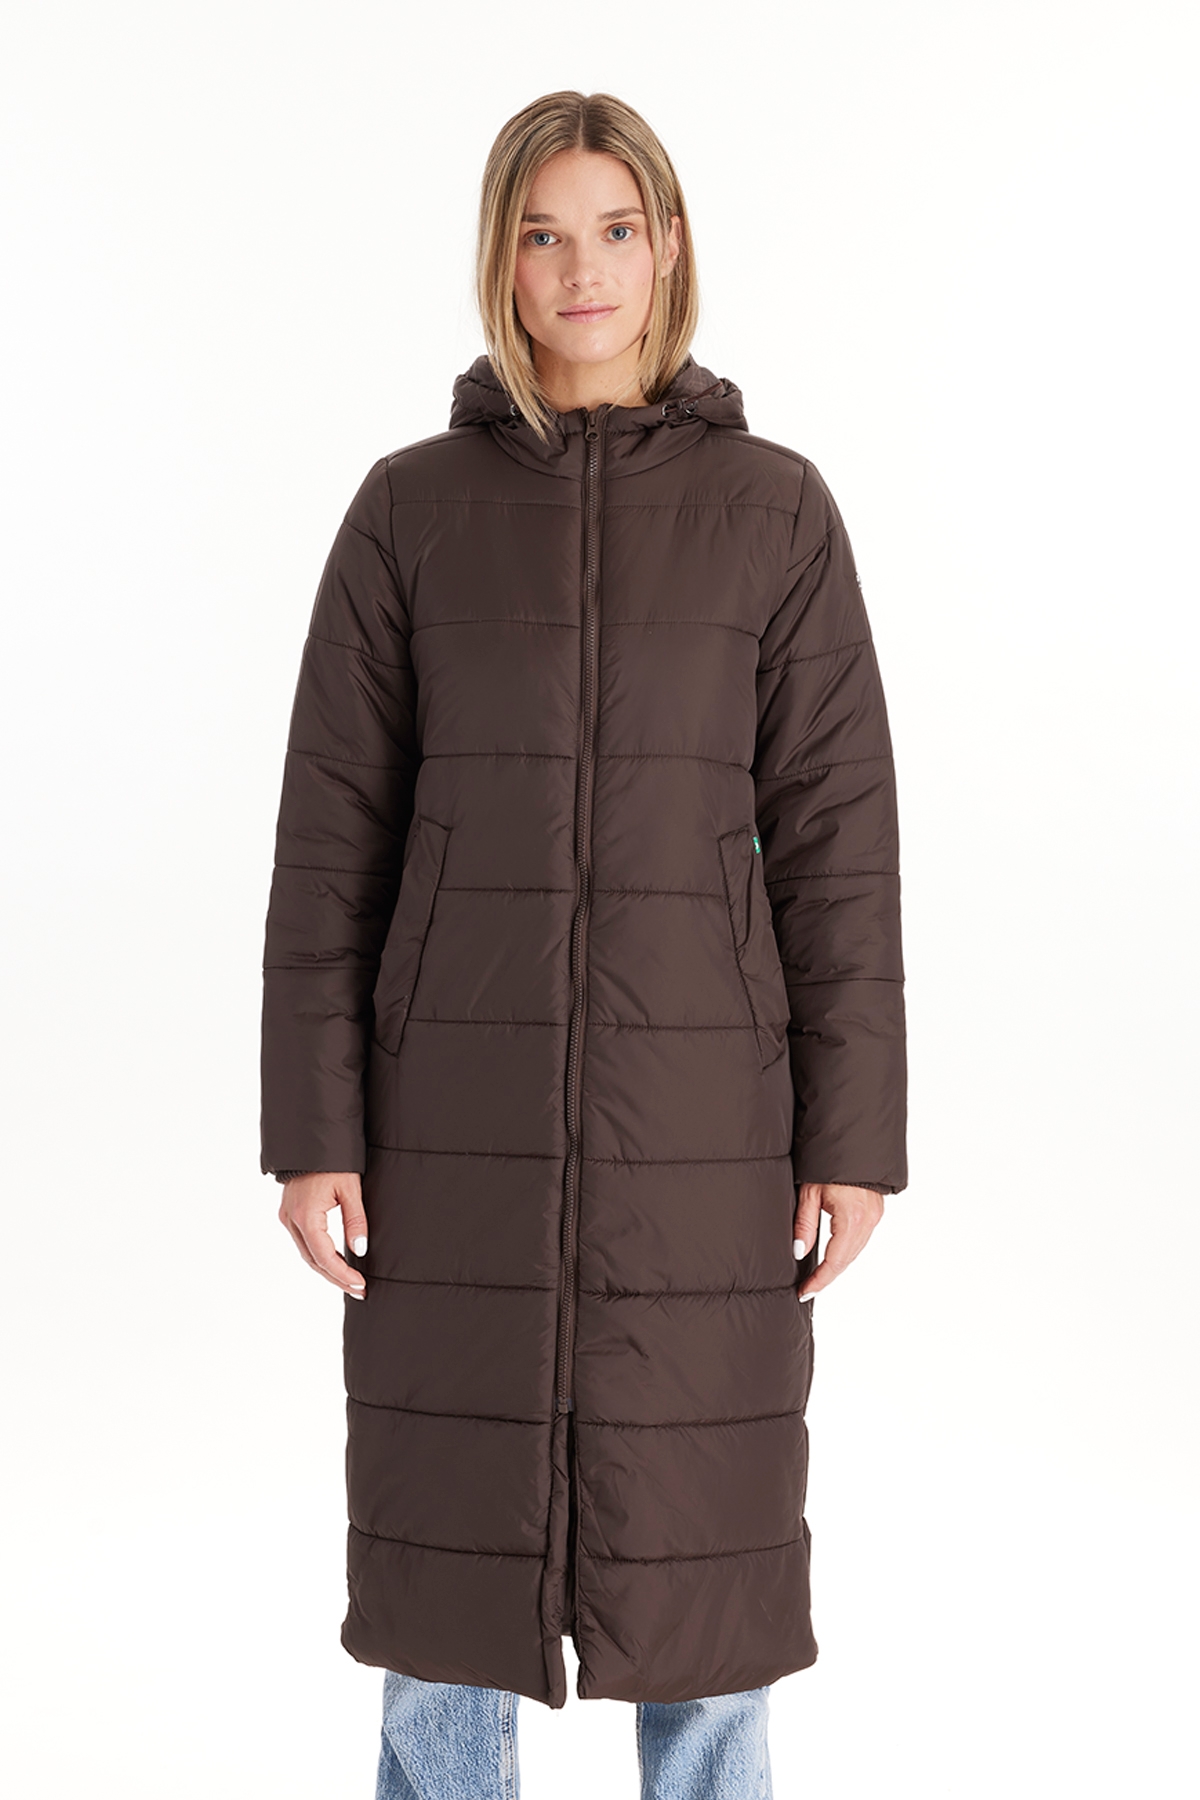 Modern Eternity Maternity Harper - 3in1 Coat Cocoon Mid Thigh